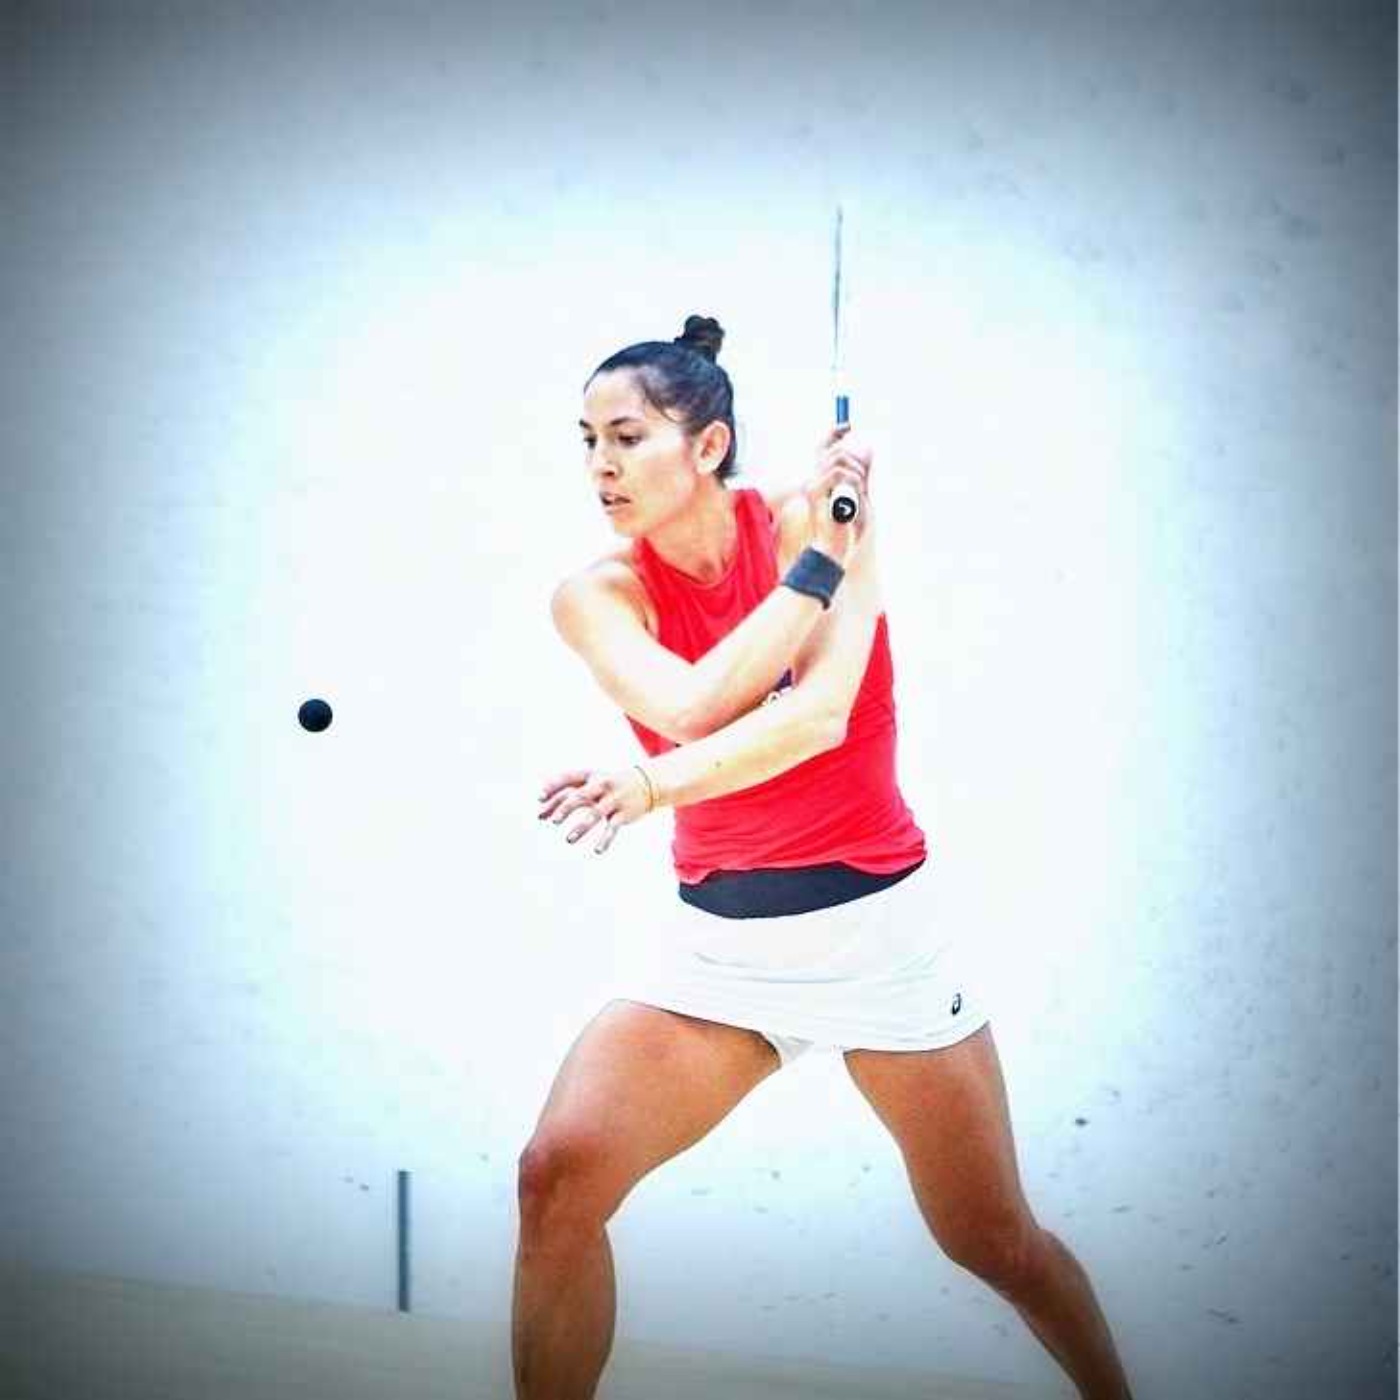 The bounce-back of squash queen Joelle King